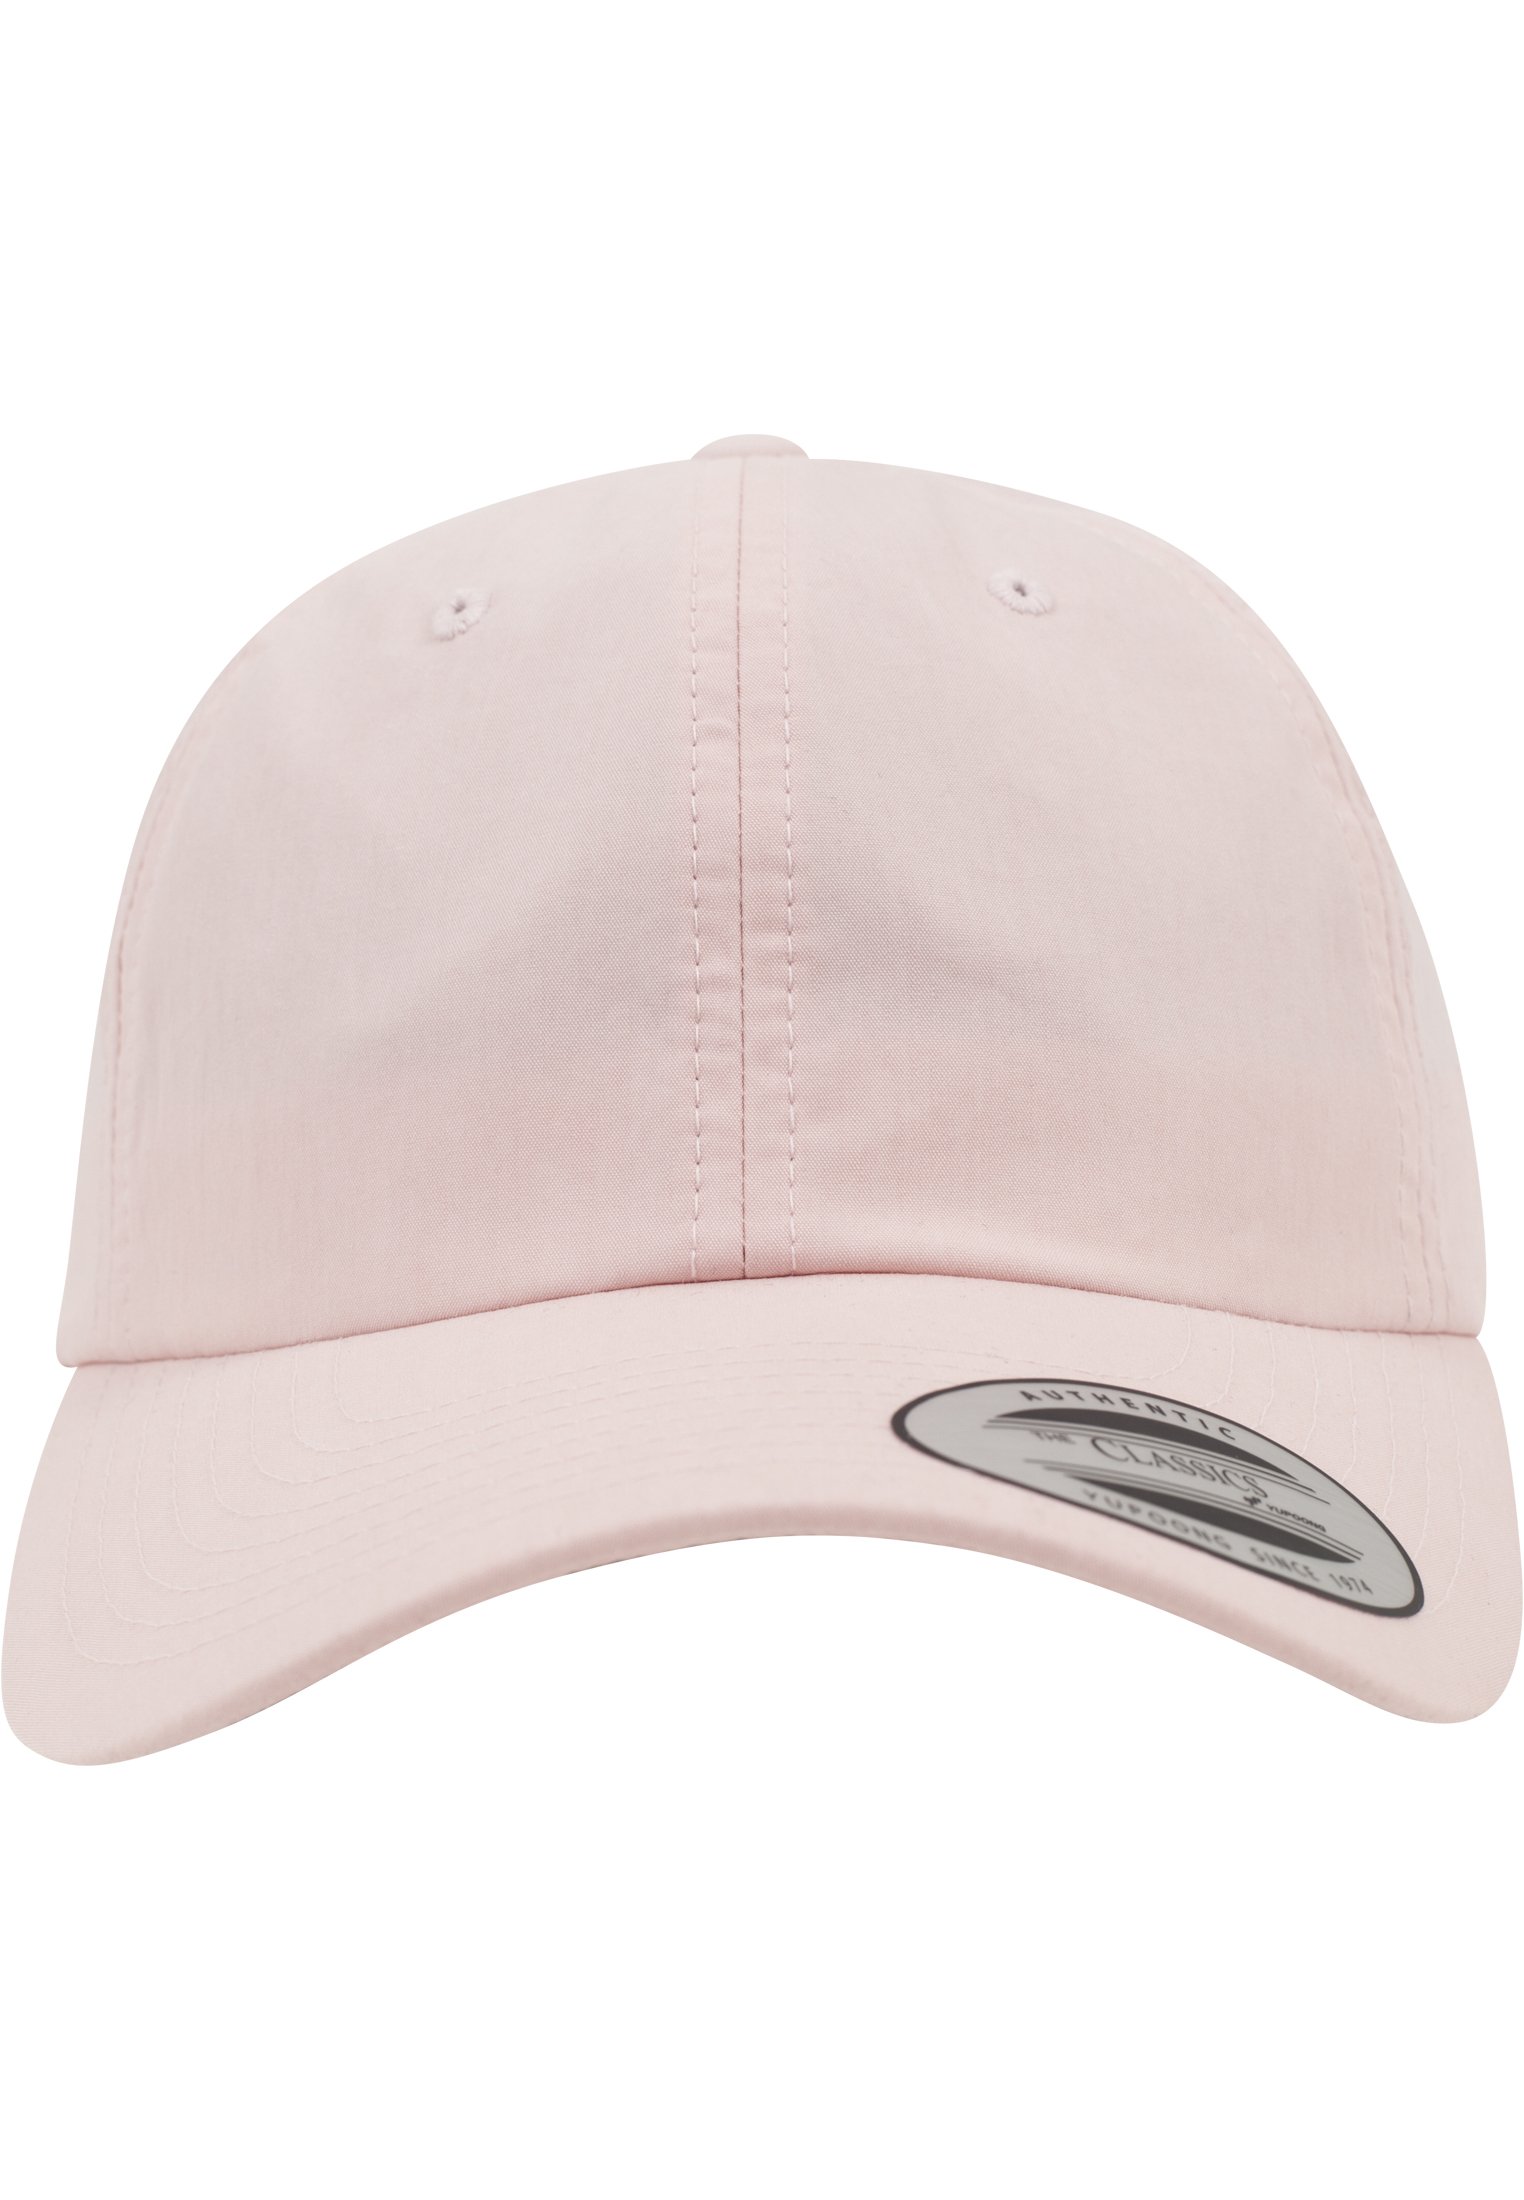 Washed Cap-6245W Profile Low